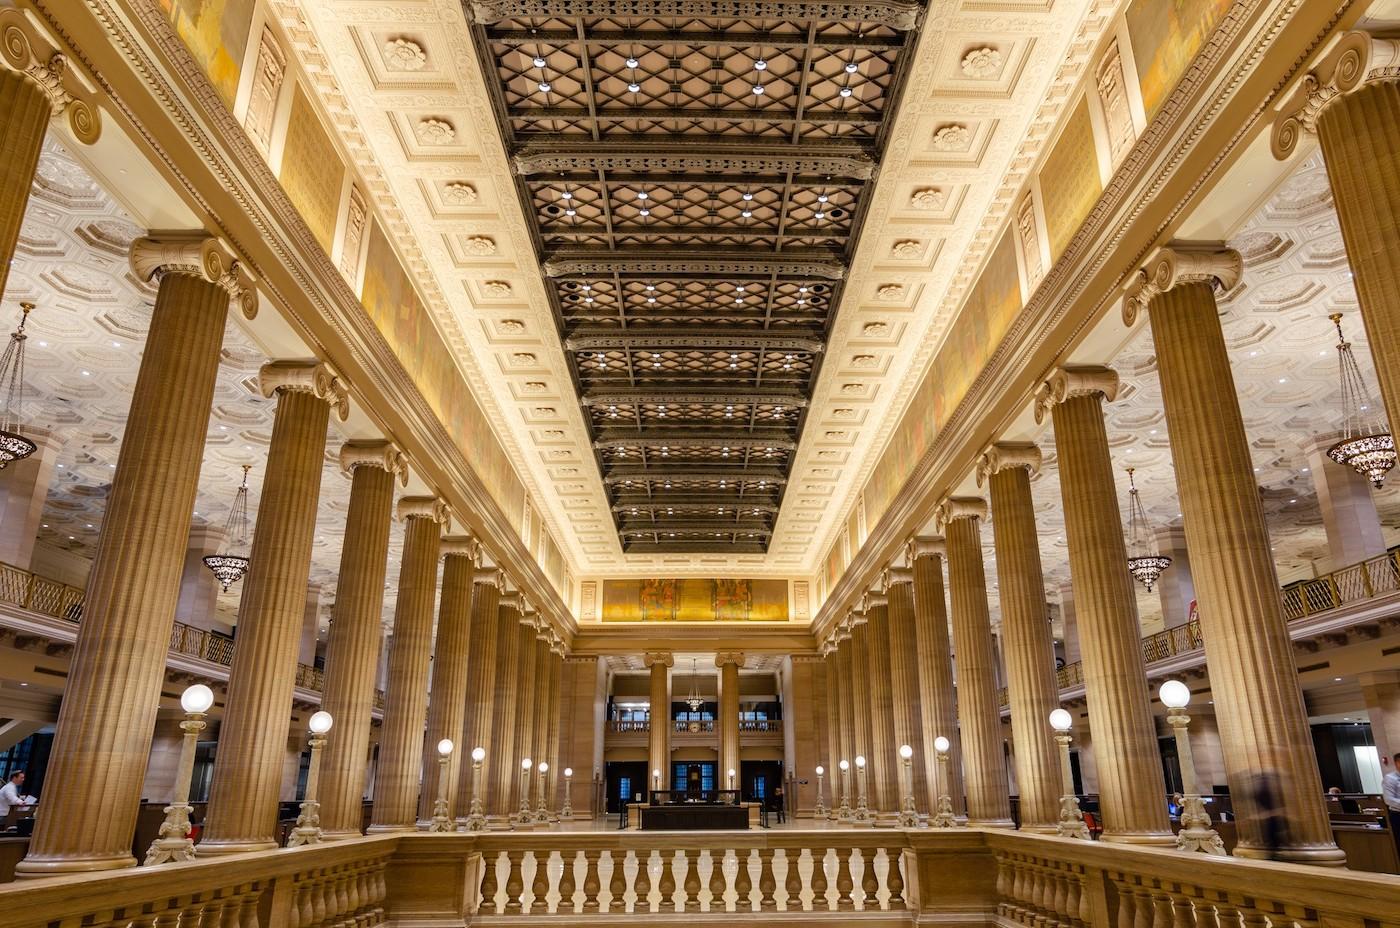 The columned lobby of the Central Standard Building in Chicago